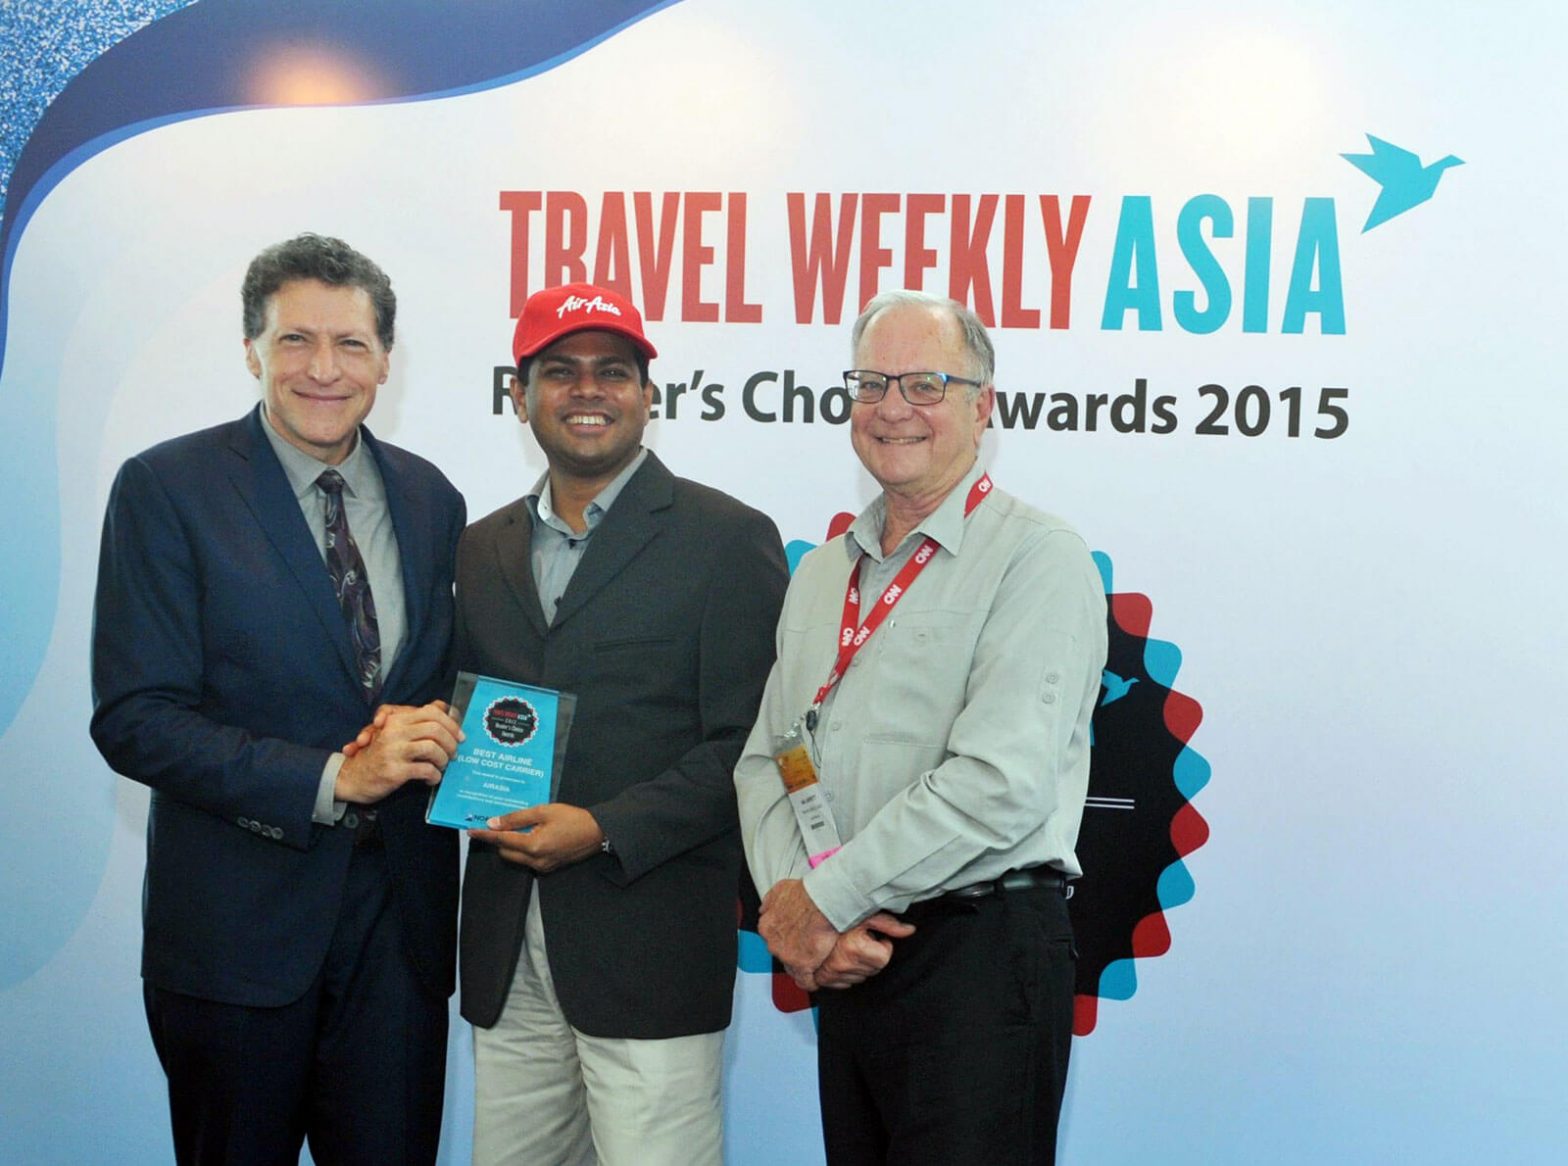 Travel Weekly Asia readers name AirAsia Best Low Cost Carrier